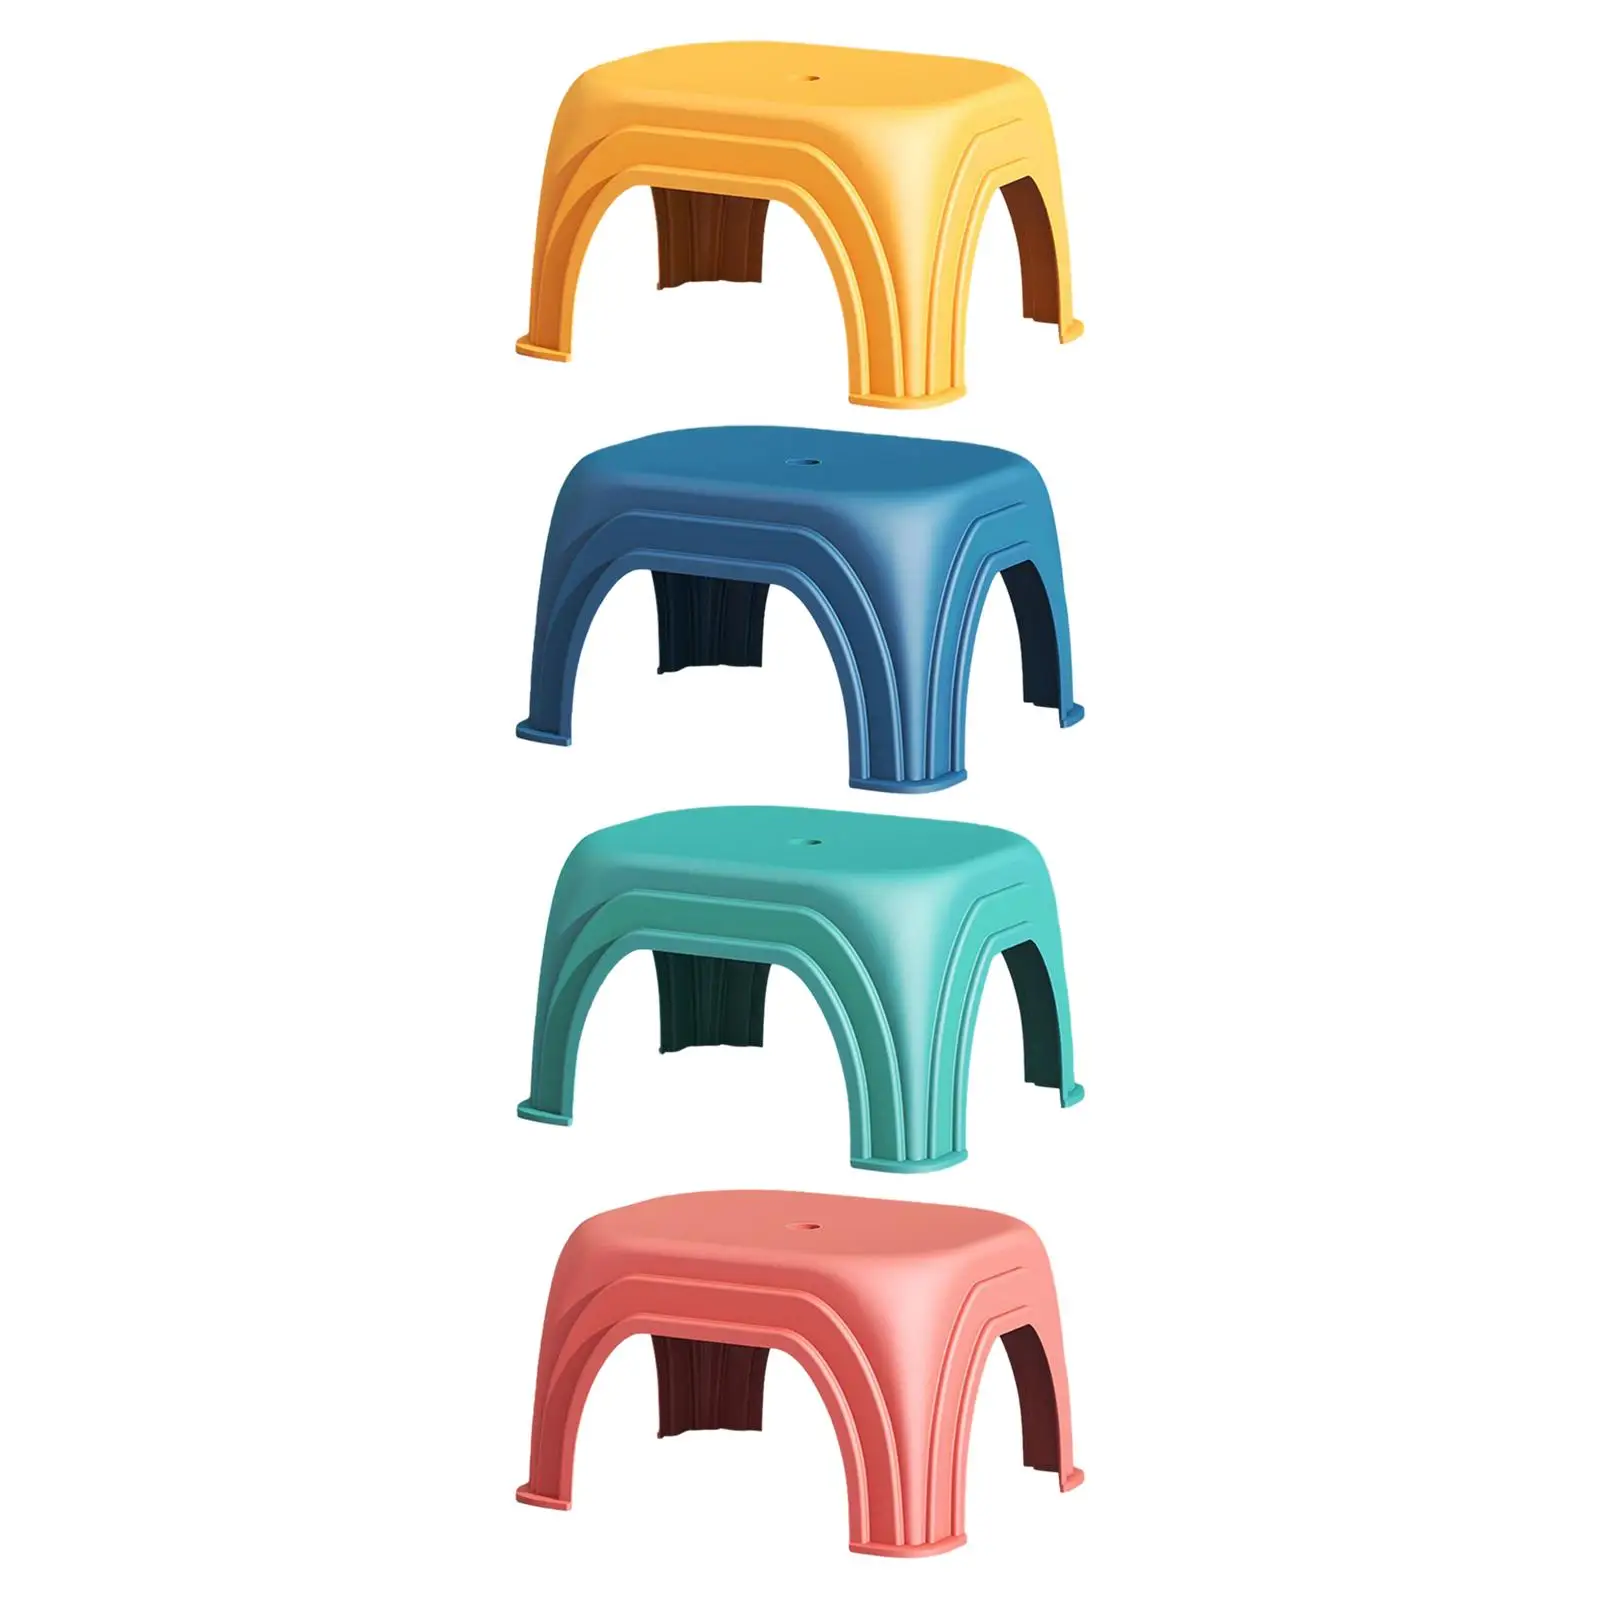 Bathroom Stool Shoe Changing Stool for Kids Adults Portable Step Stool Non Slip Foot Stool for Home Kitchen Bedroom Laundry